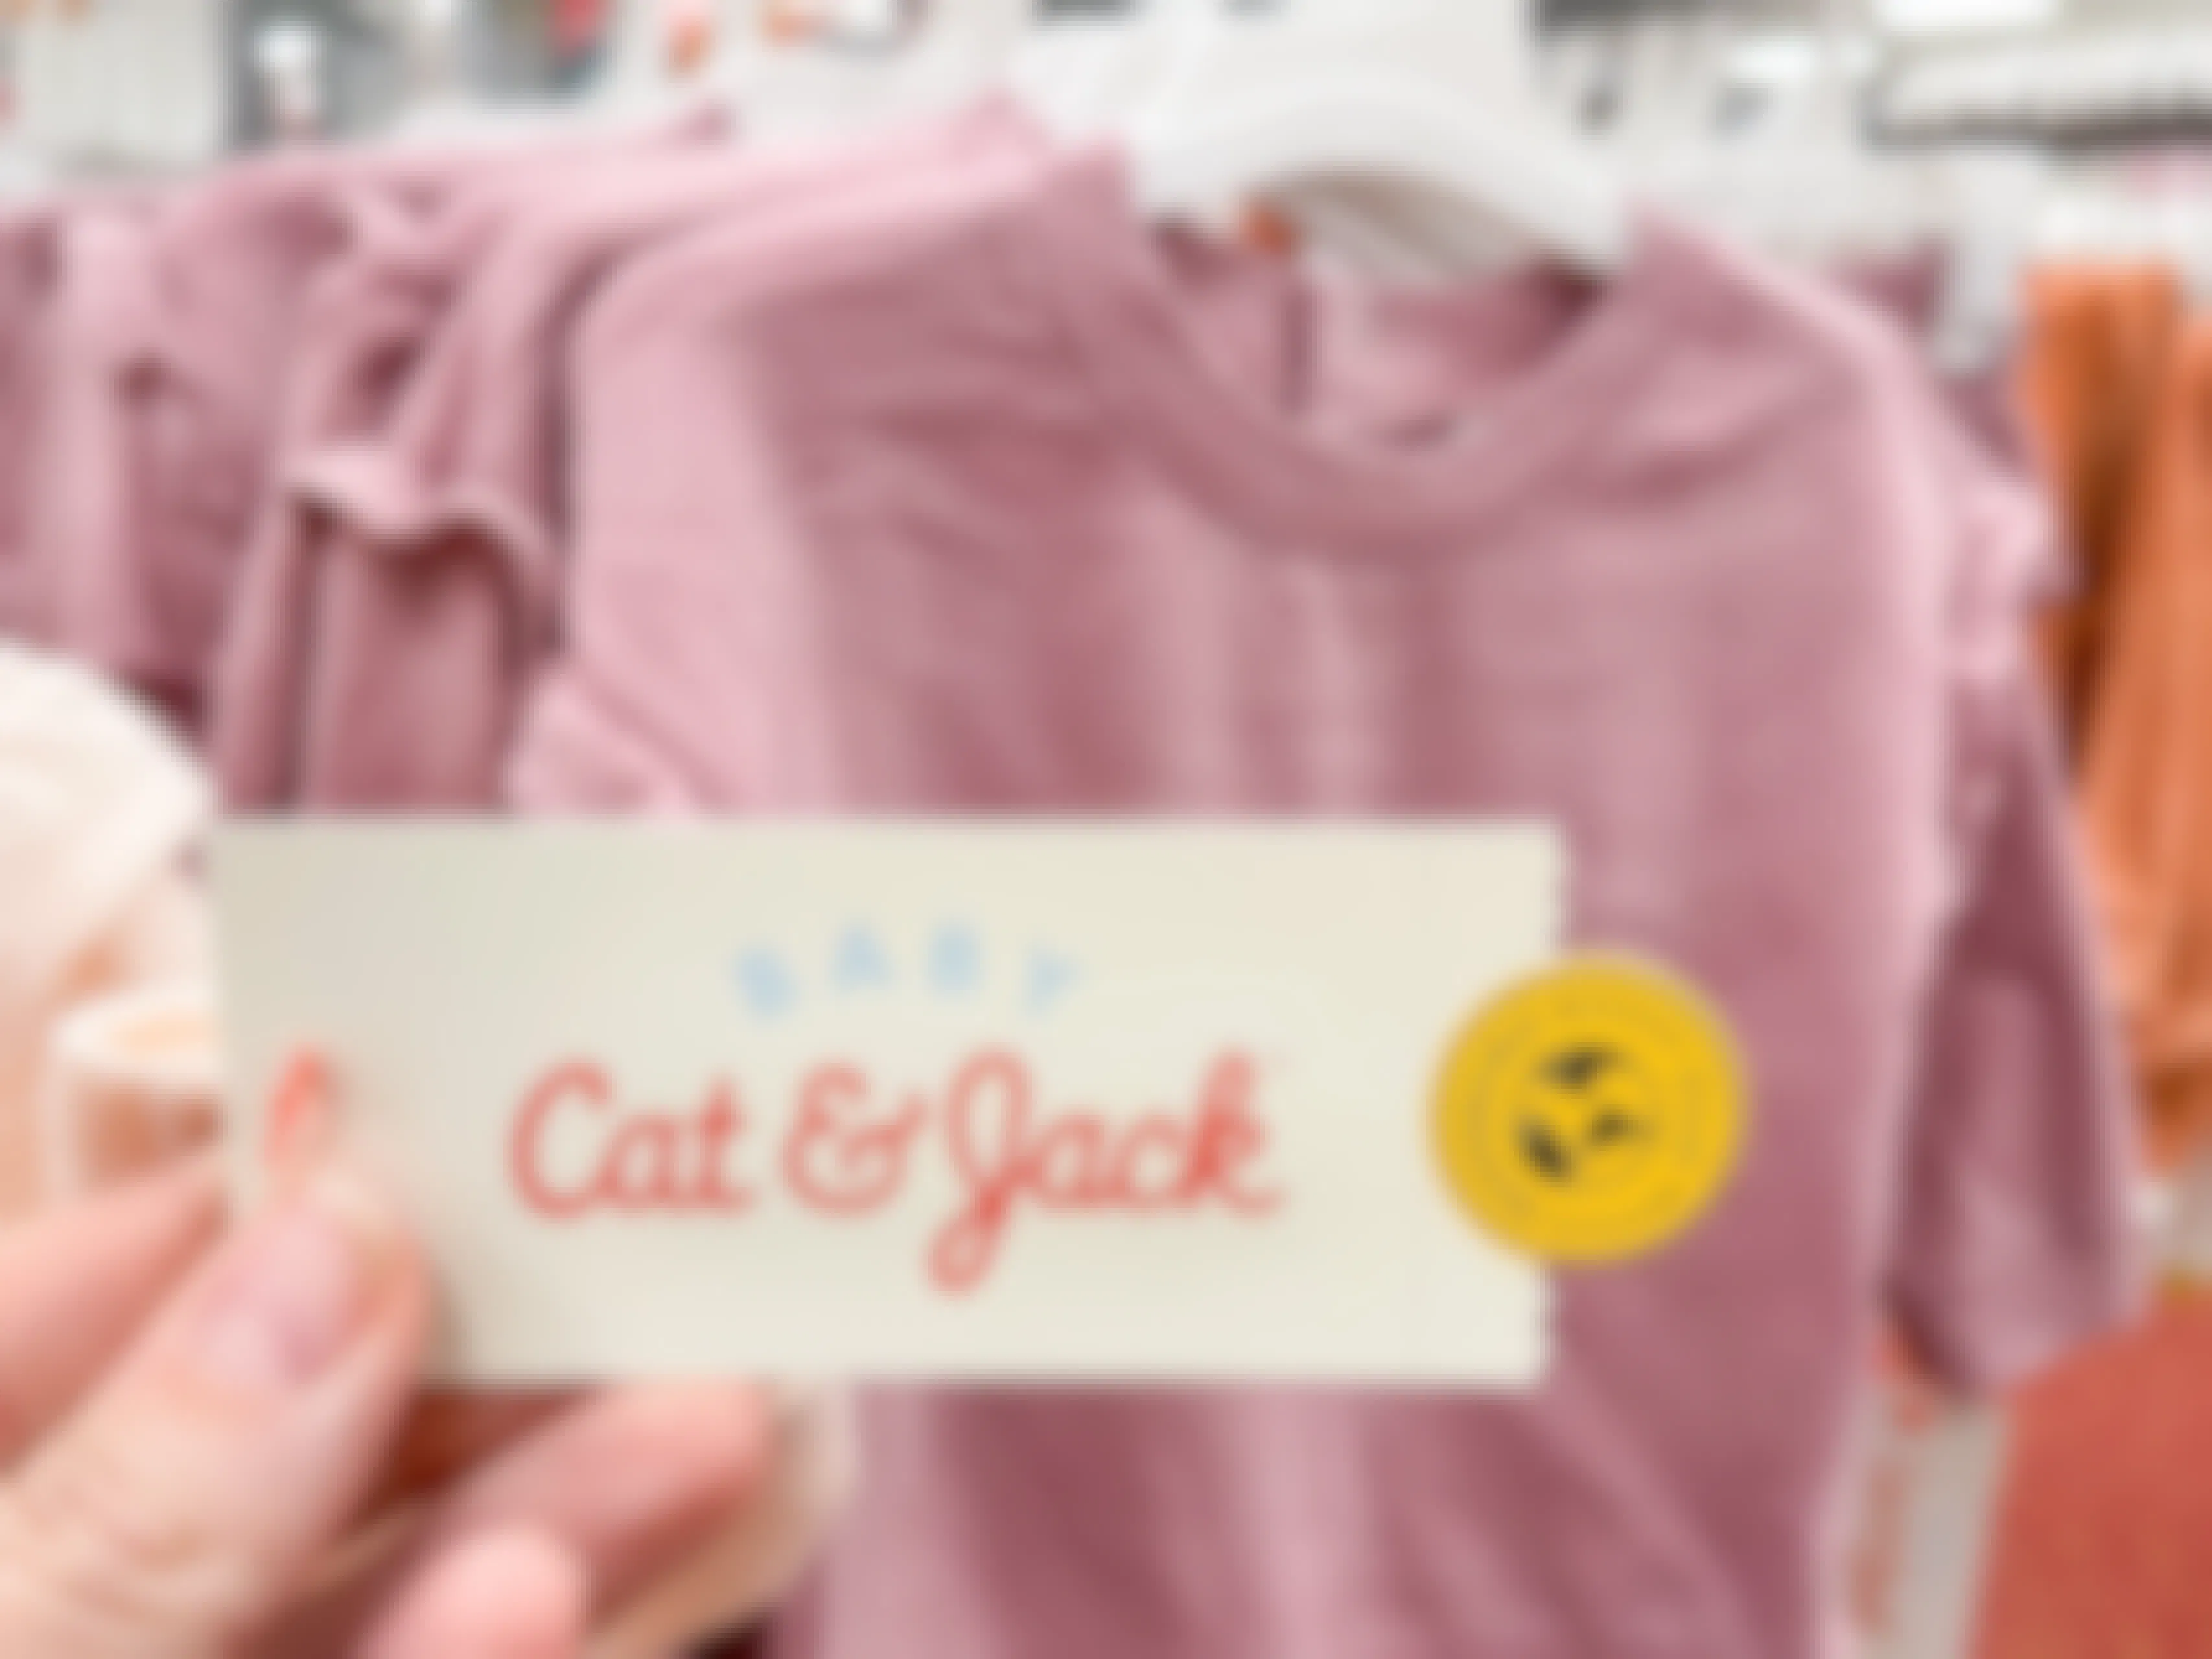 A Baby Cat & Jack tag held out by hand with infant clothes hanging in the back ground.